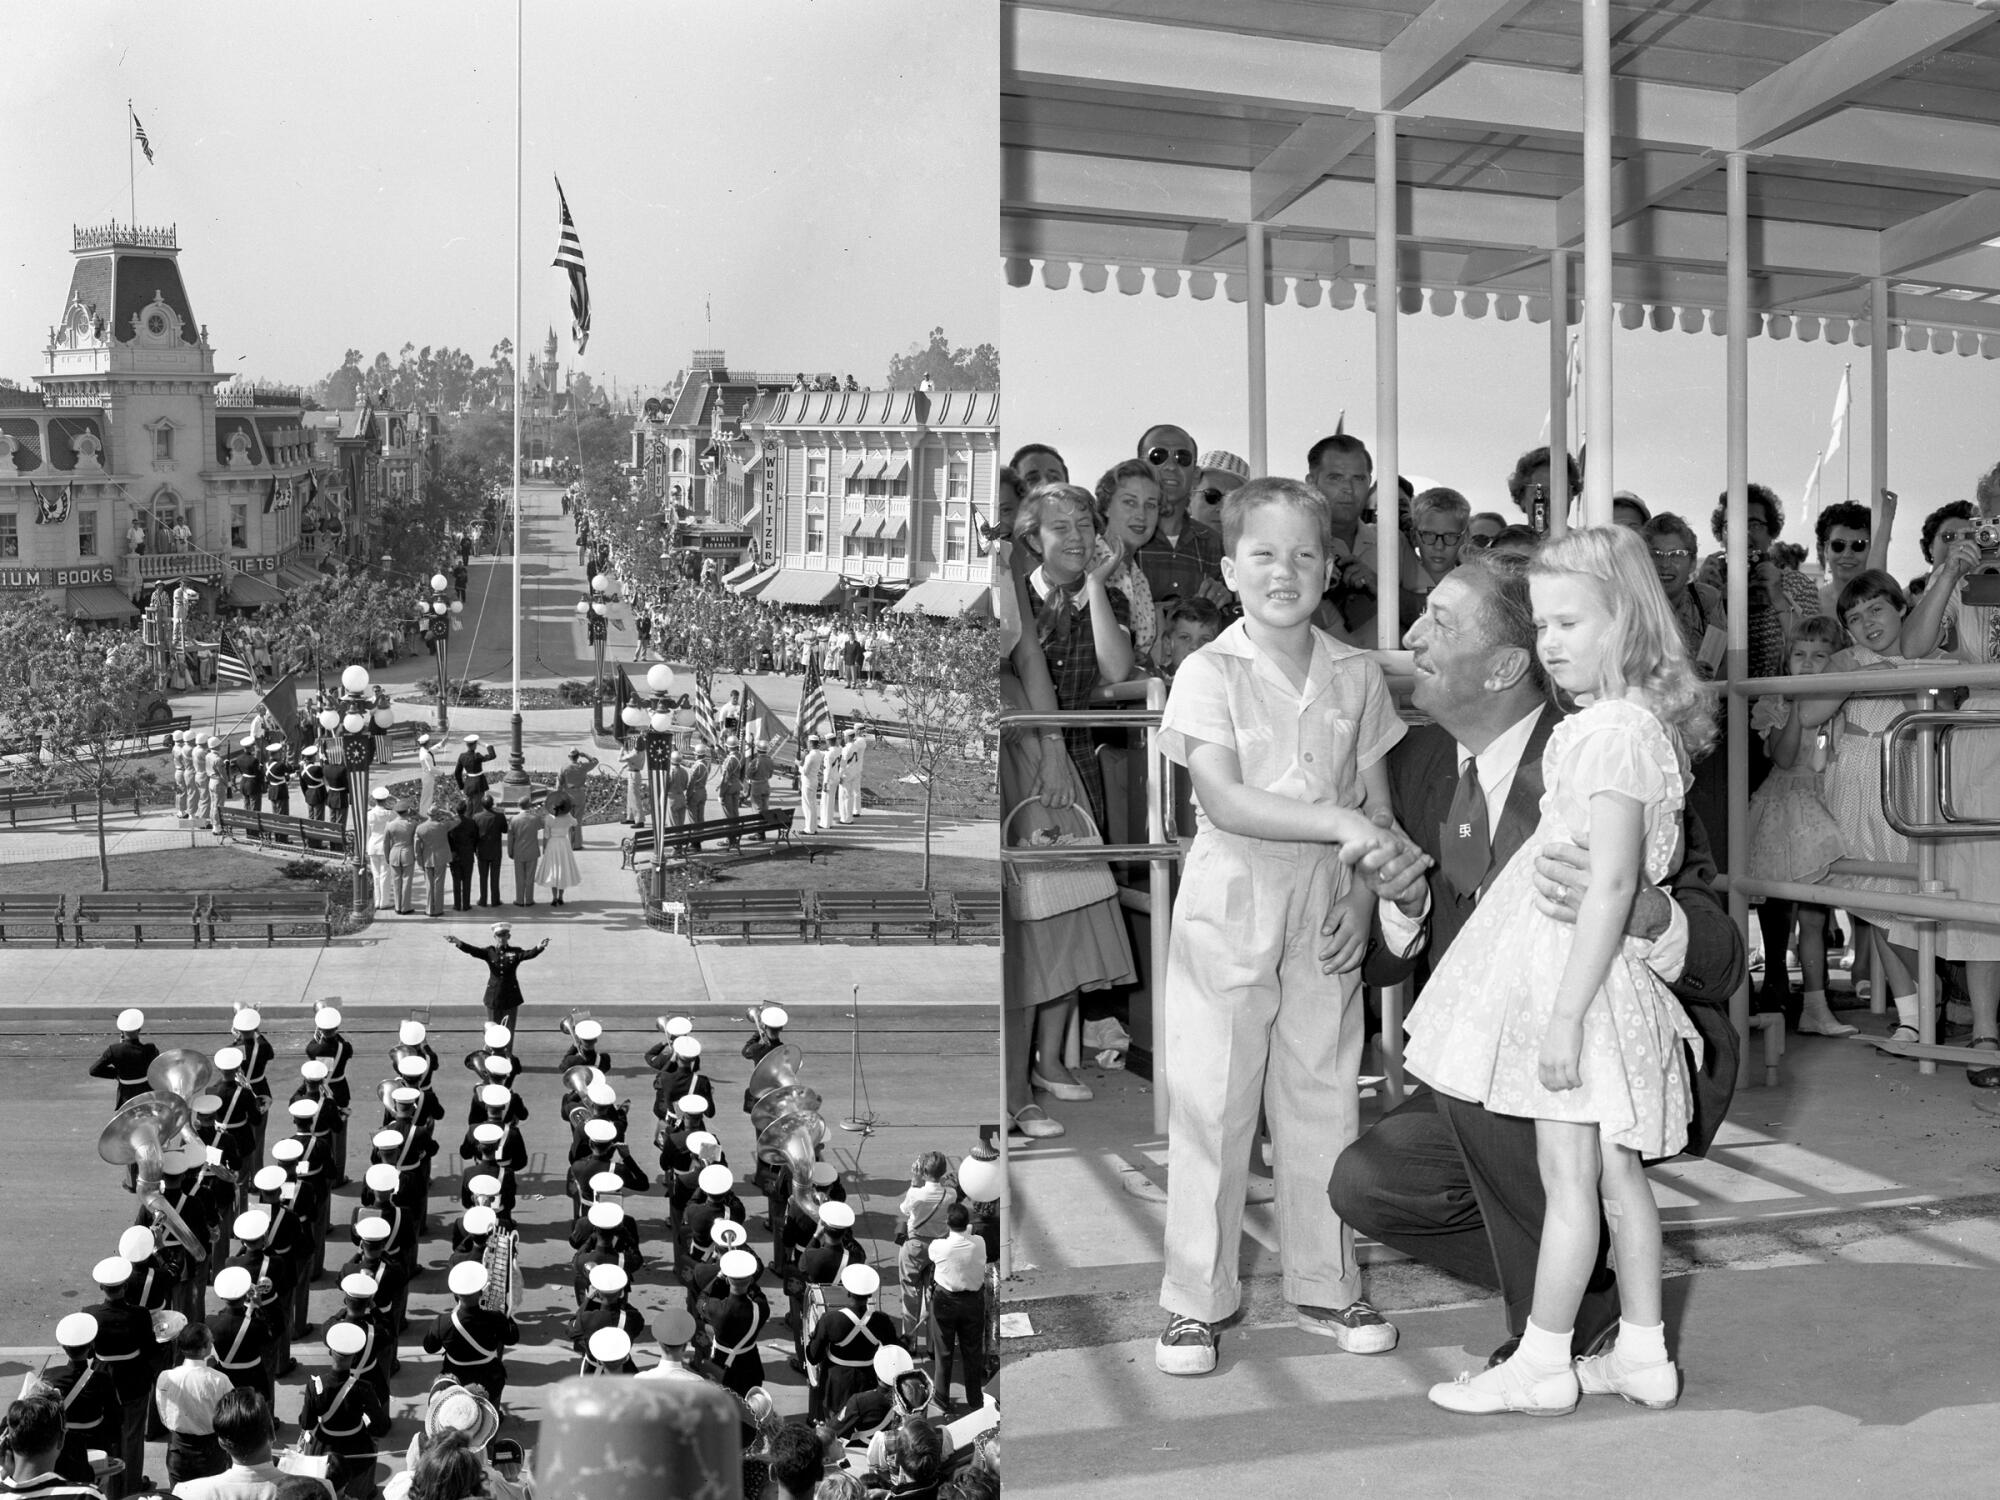 Two images: a band faces a flag pole and Walt Disney welcomes two kids to the park